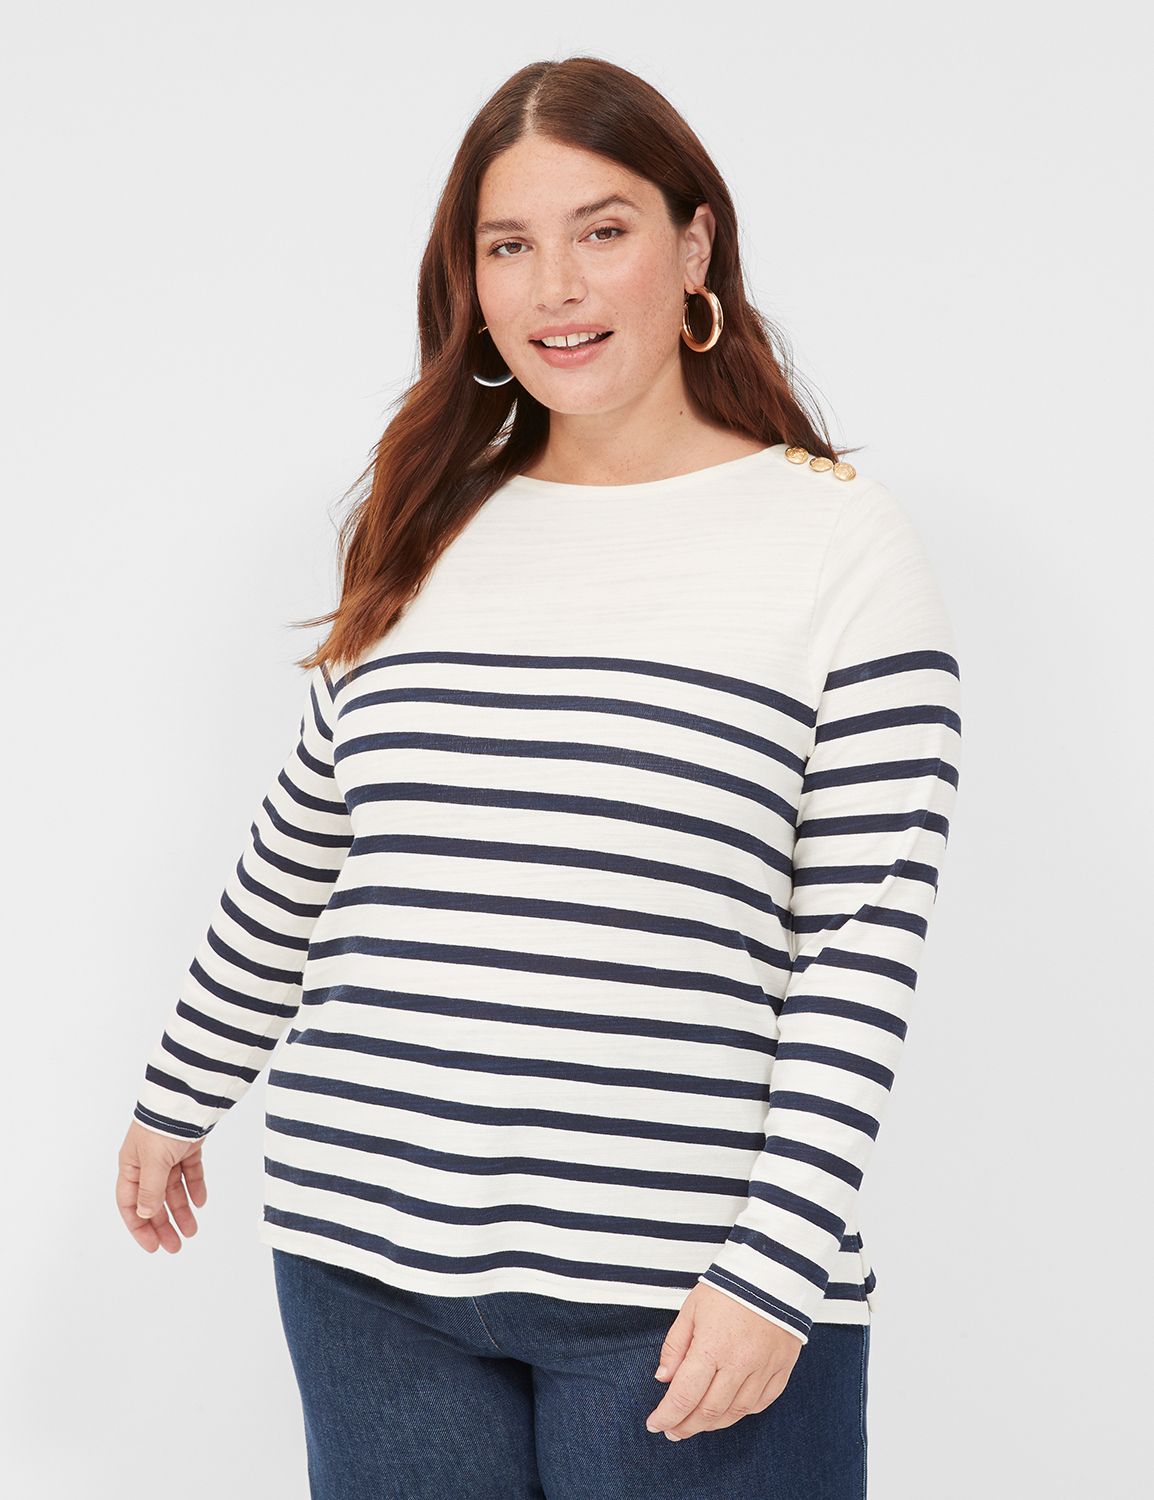 Cato Fashions  Cato Plus Size Happy Hour Waffle Top